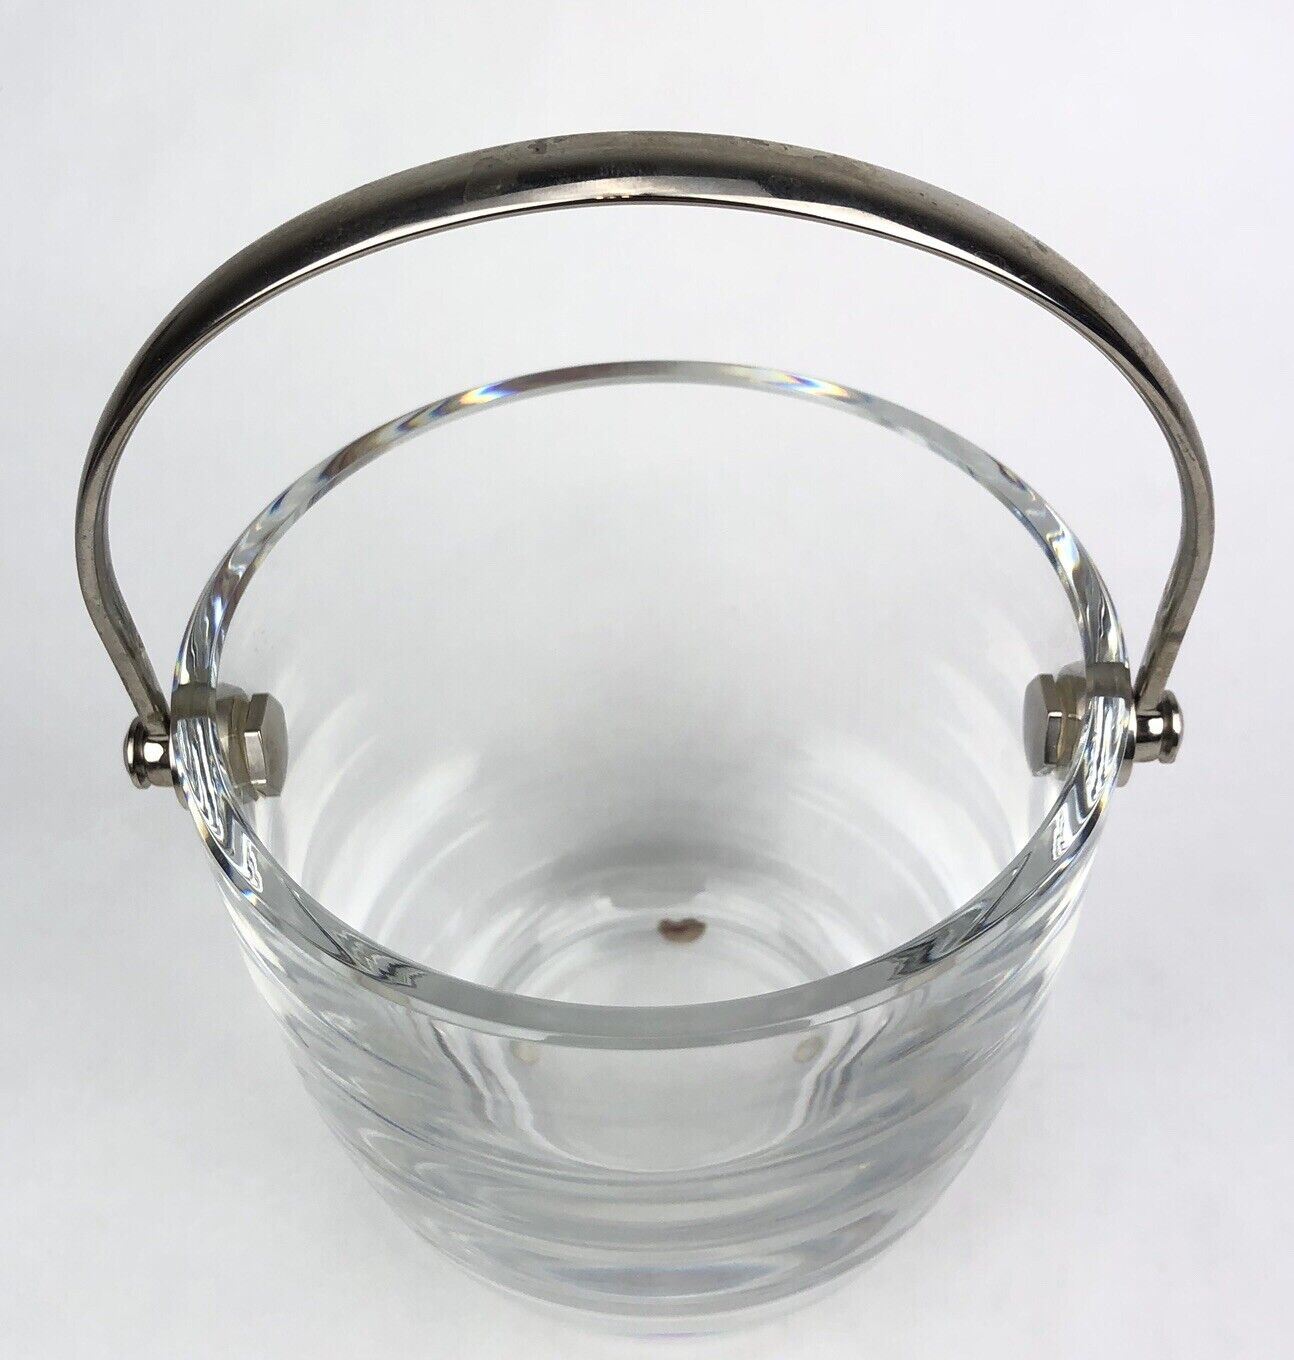 Vintage BACCARAT Livourne ICE BUCKET Optic Crystal Art Glass SIGNED & ETCHED